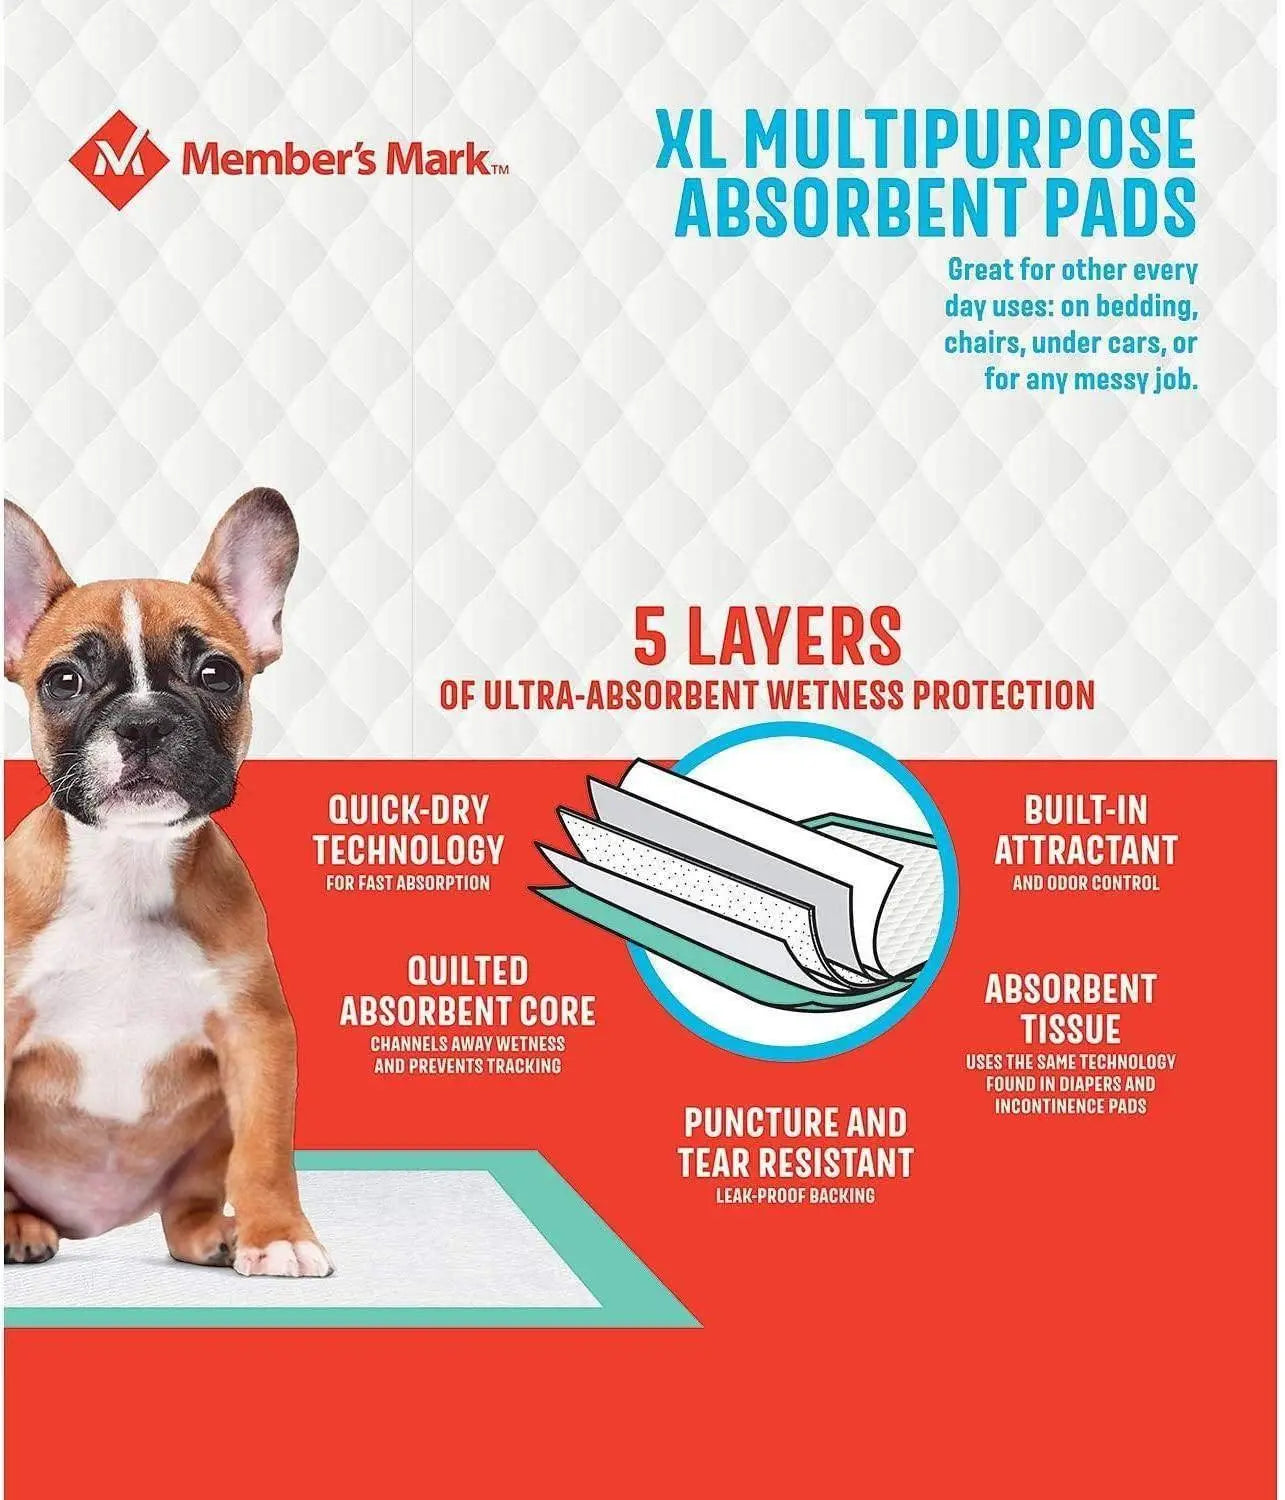 Wholesale prices with free shipping all over United States Member's Mark Pet Training Pads, 23